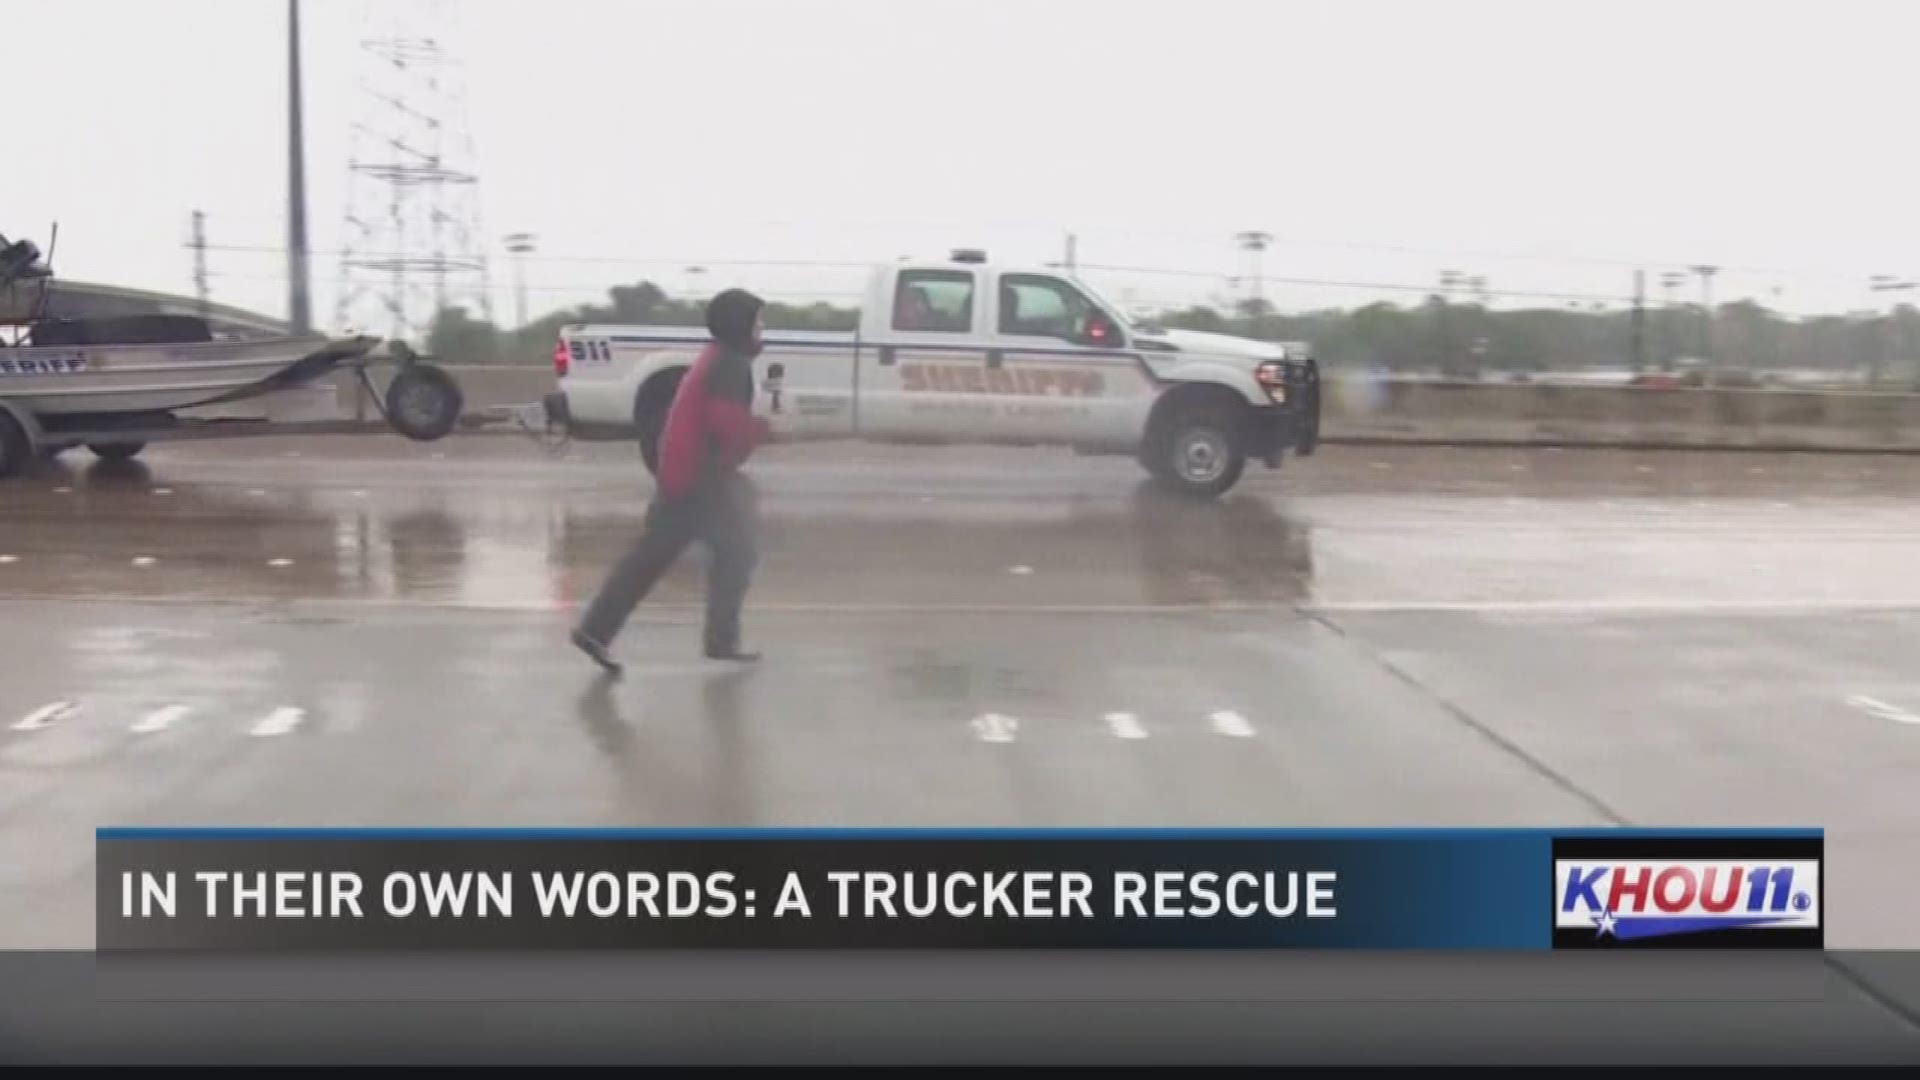 In their own words, KHOU 11 reporter Brandi Smith and photographer Mario Sandoval recount the rescue of a truck driver on live TV during Hurricane Harvey.